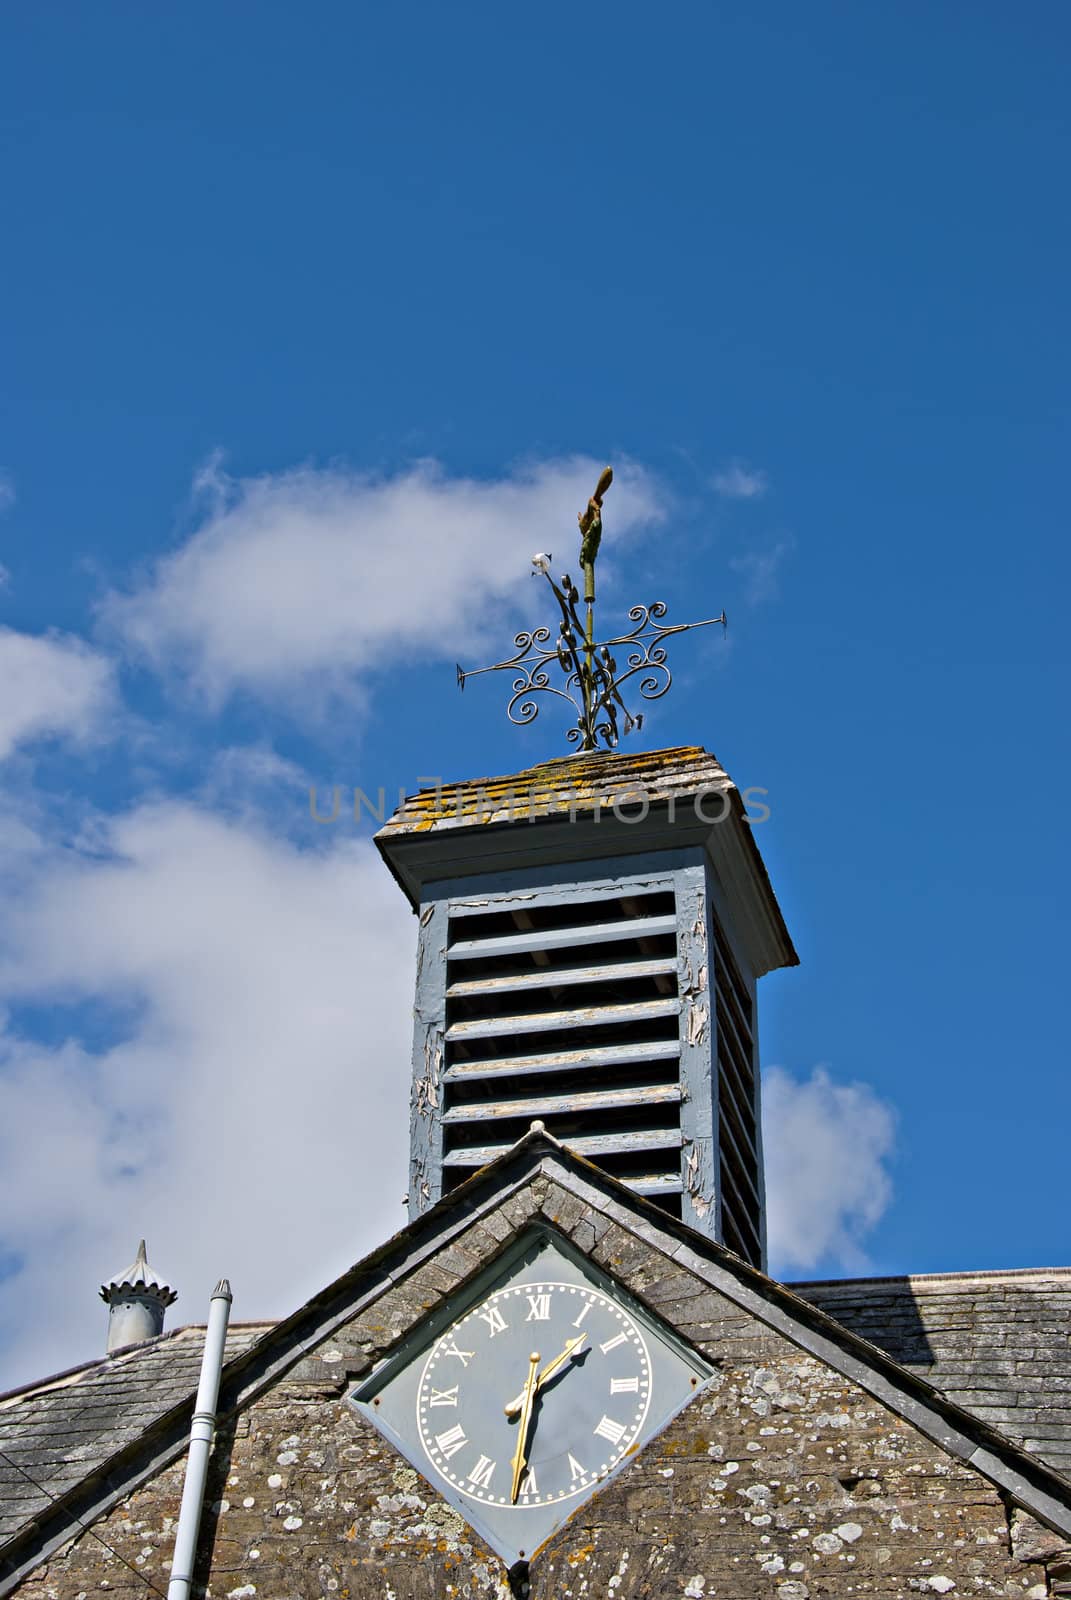 Weathervane and Clocktower by d40xboy